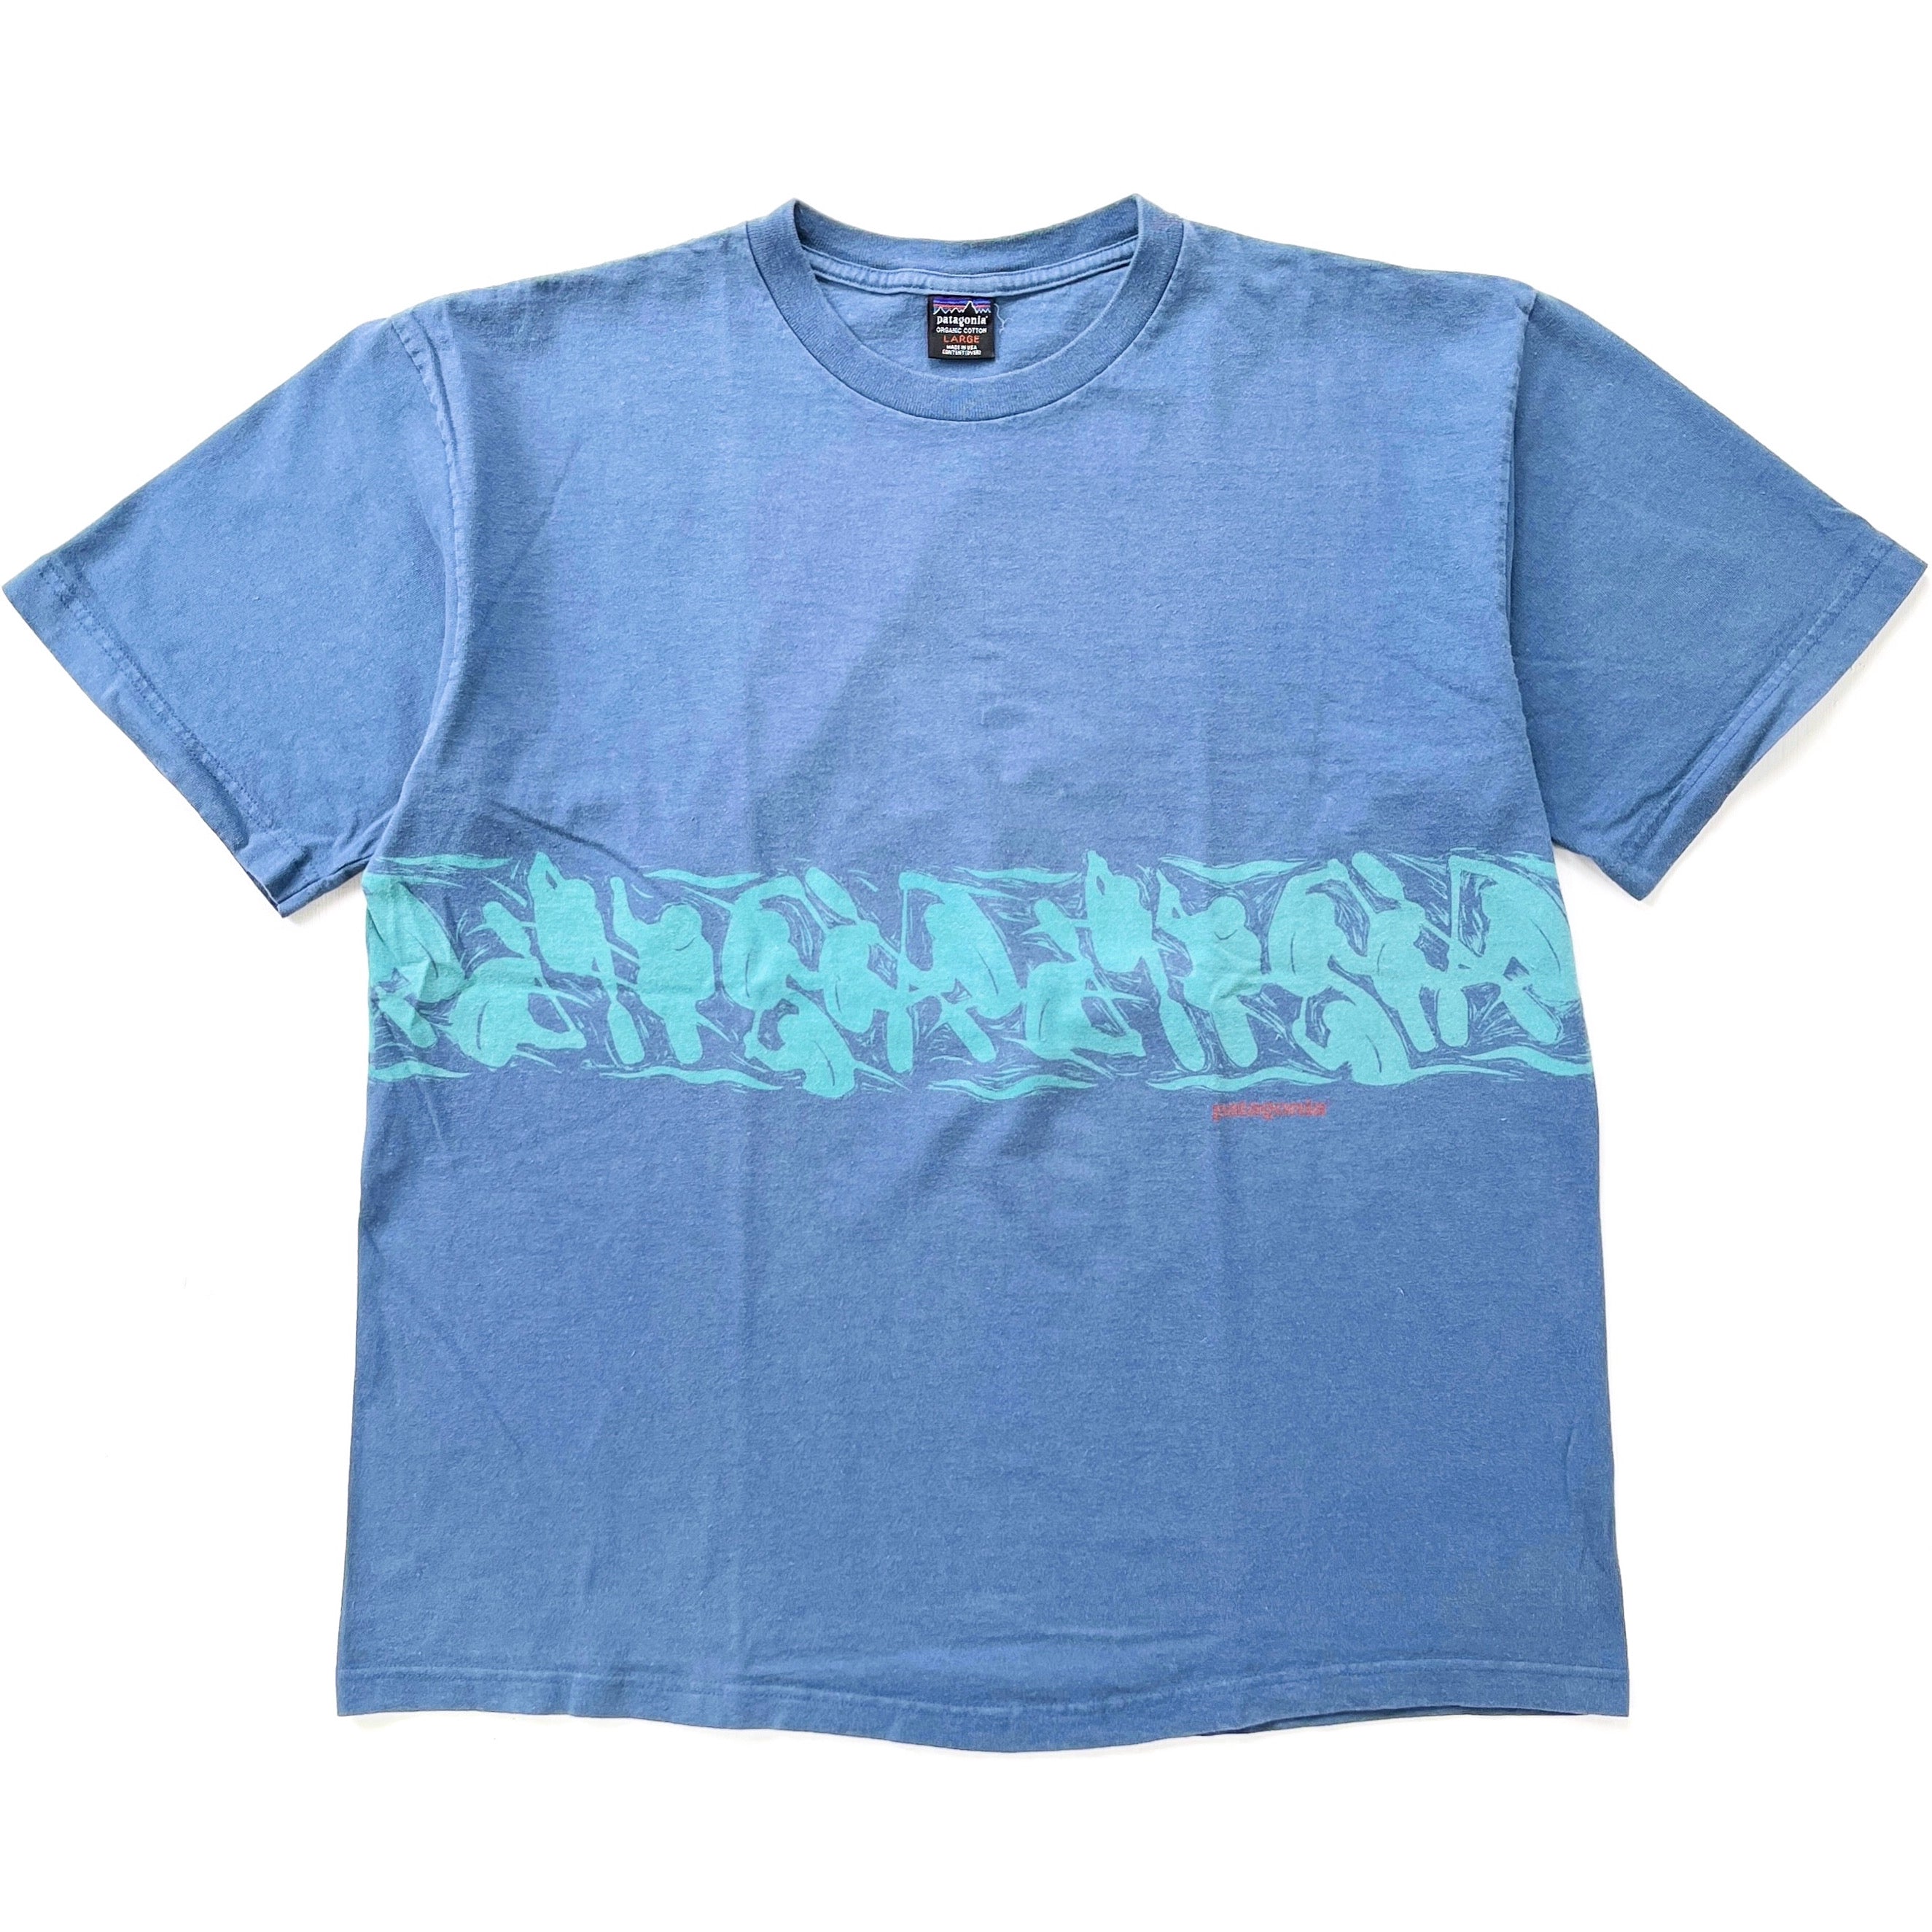 1990s Patagonia Made In The U.S.A. Organic Cotton T-Shirt (L)